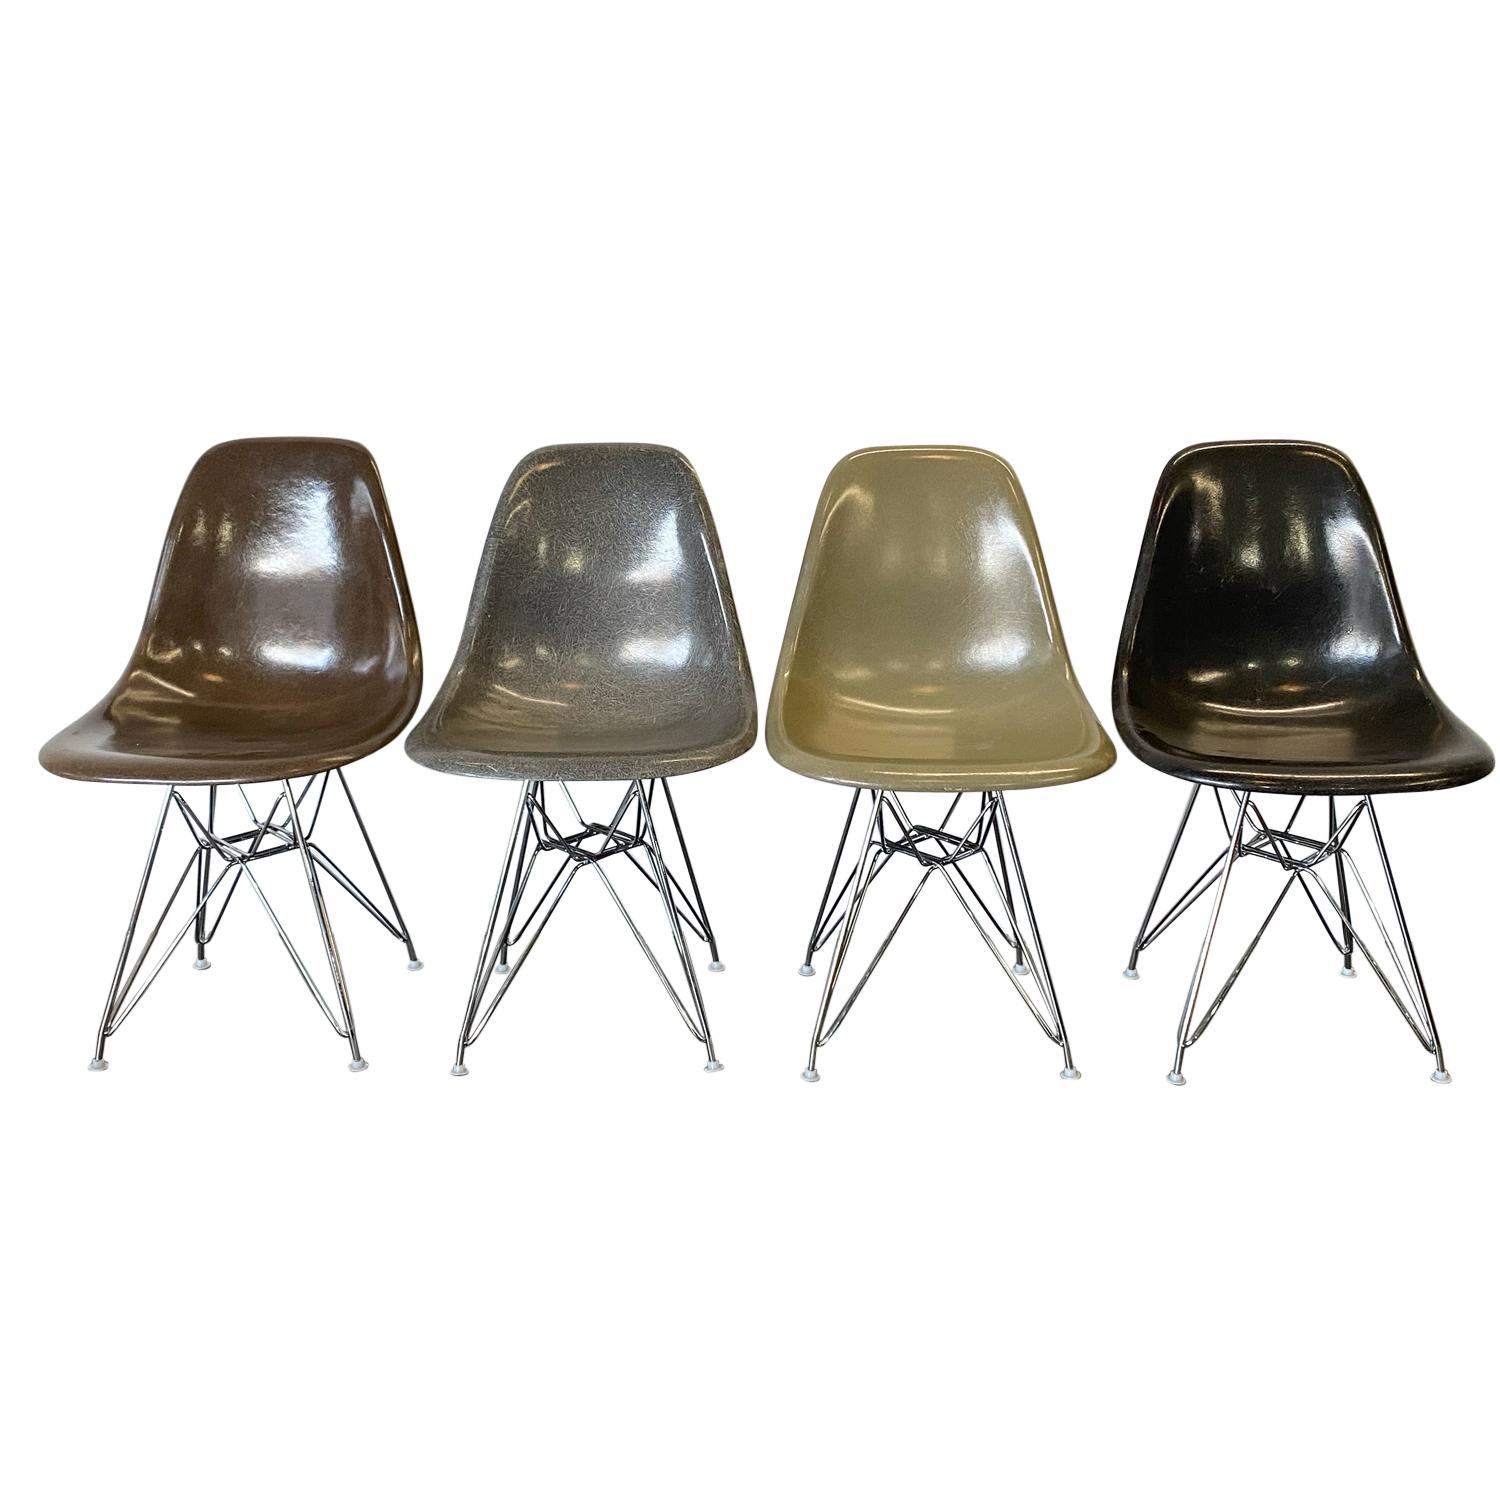 Herman Miller Eames DSR Dining Chairs in Earth Tones